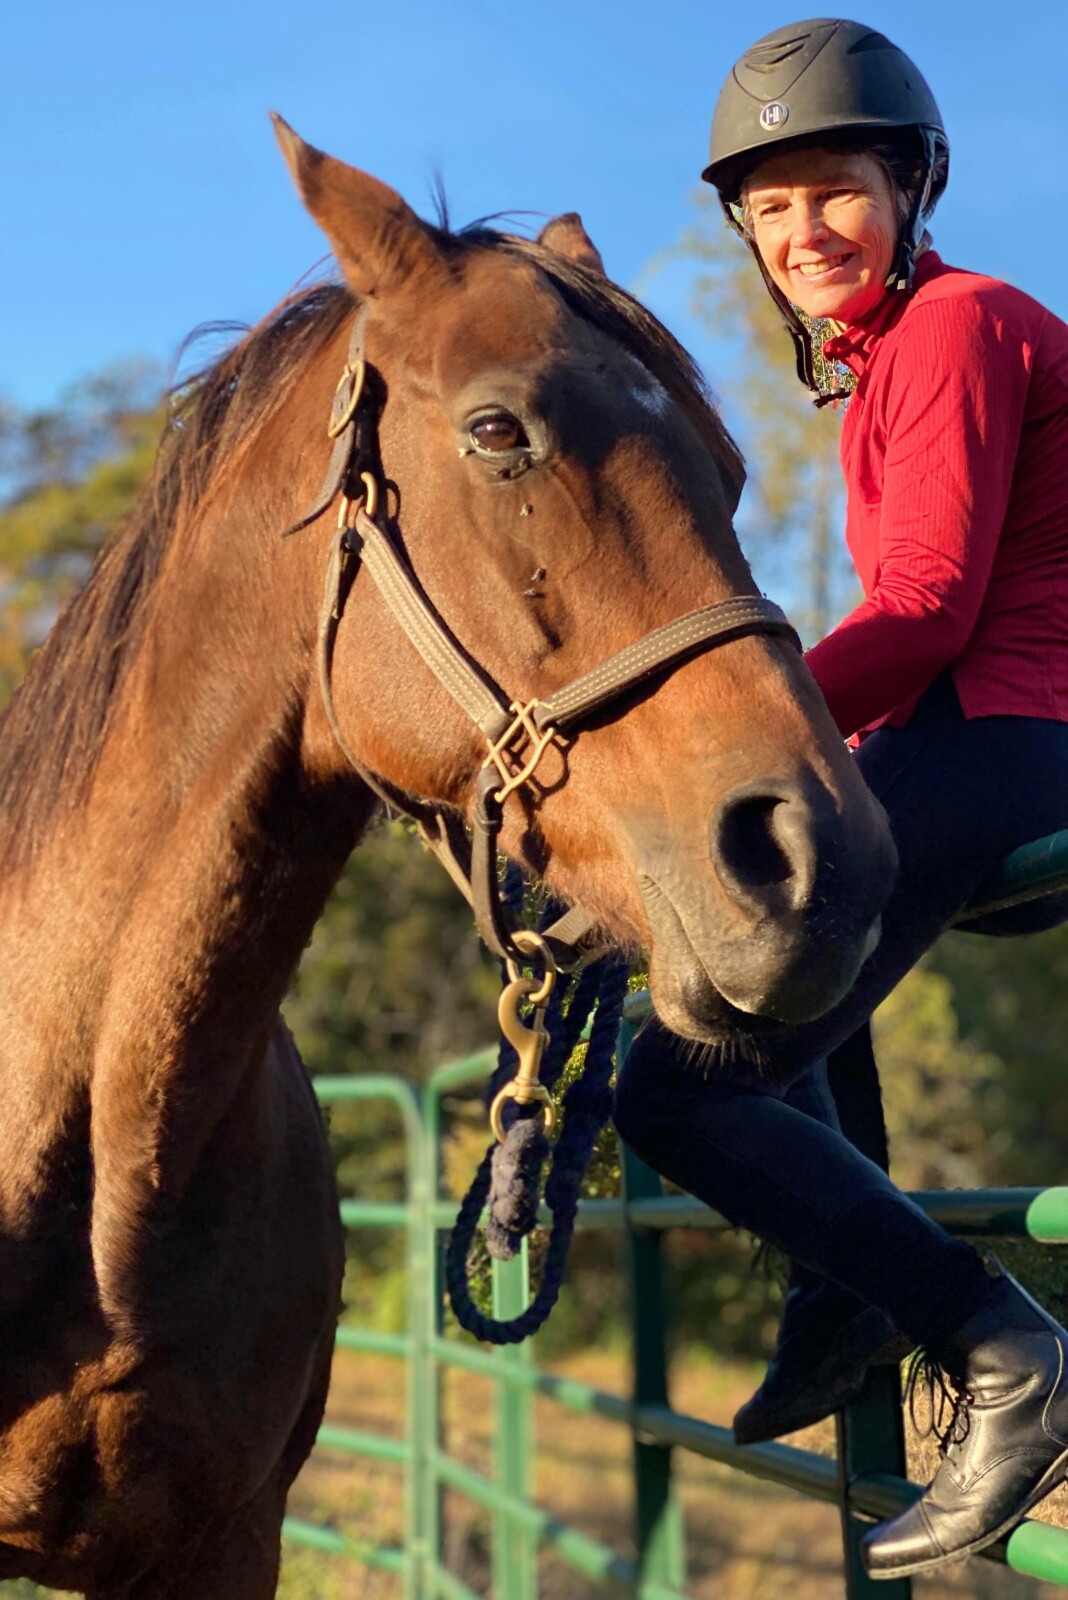 What is Mindfulness and How Does it Apply to My Horse?